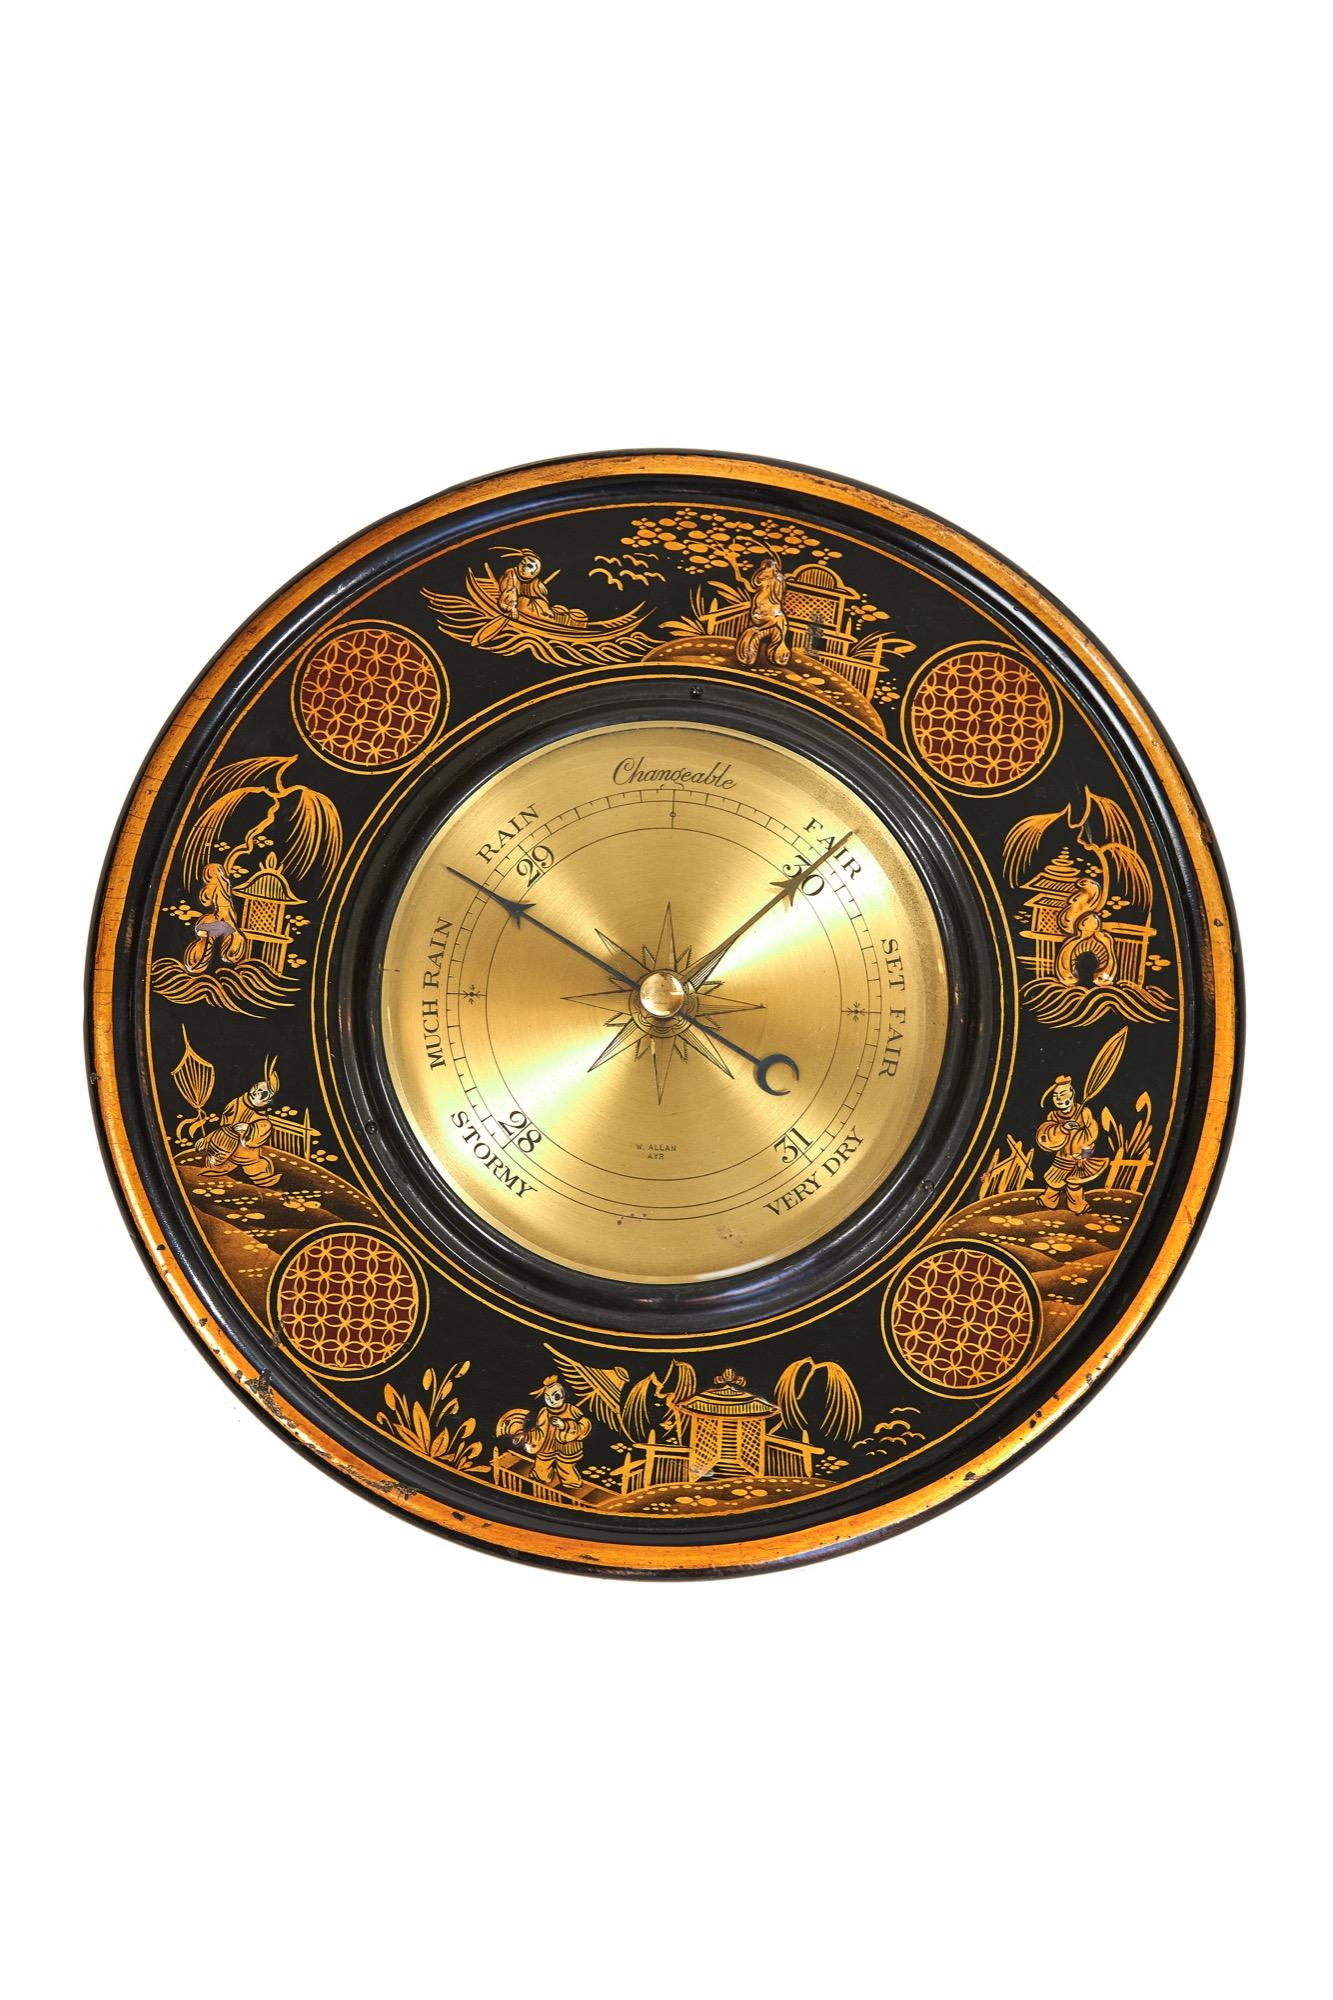 Chinoiserie decorated circular barometer, circa 1930s.
Black background with gold decoration,  
Depicting, houses, temple, figures, trees & foliage,
Brass face,
Badge on back, reads: ACME Barometers No 117
In lovely original condition.